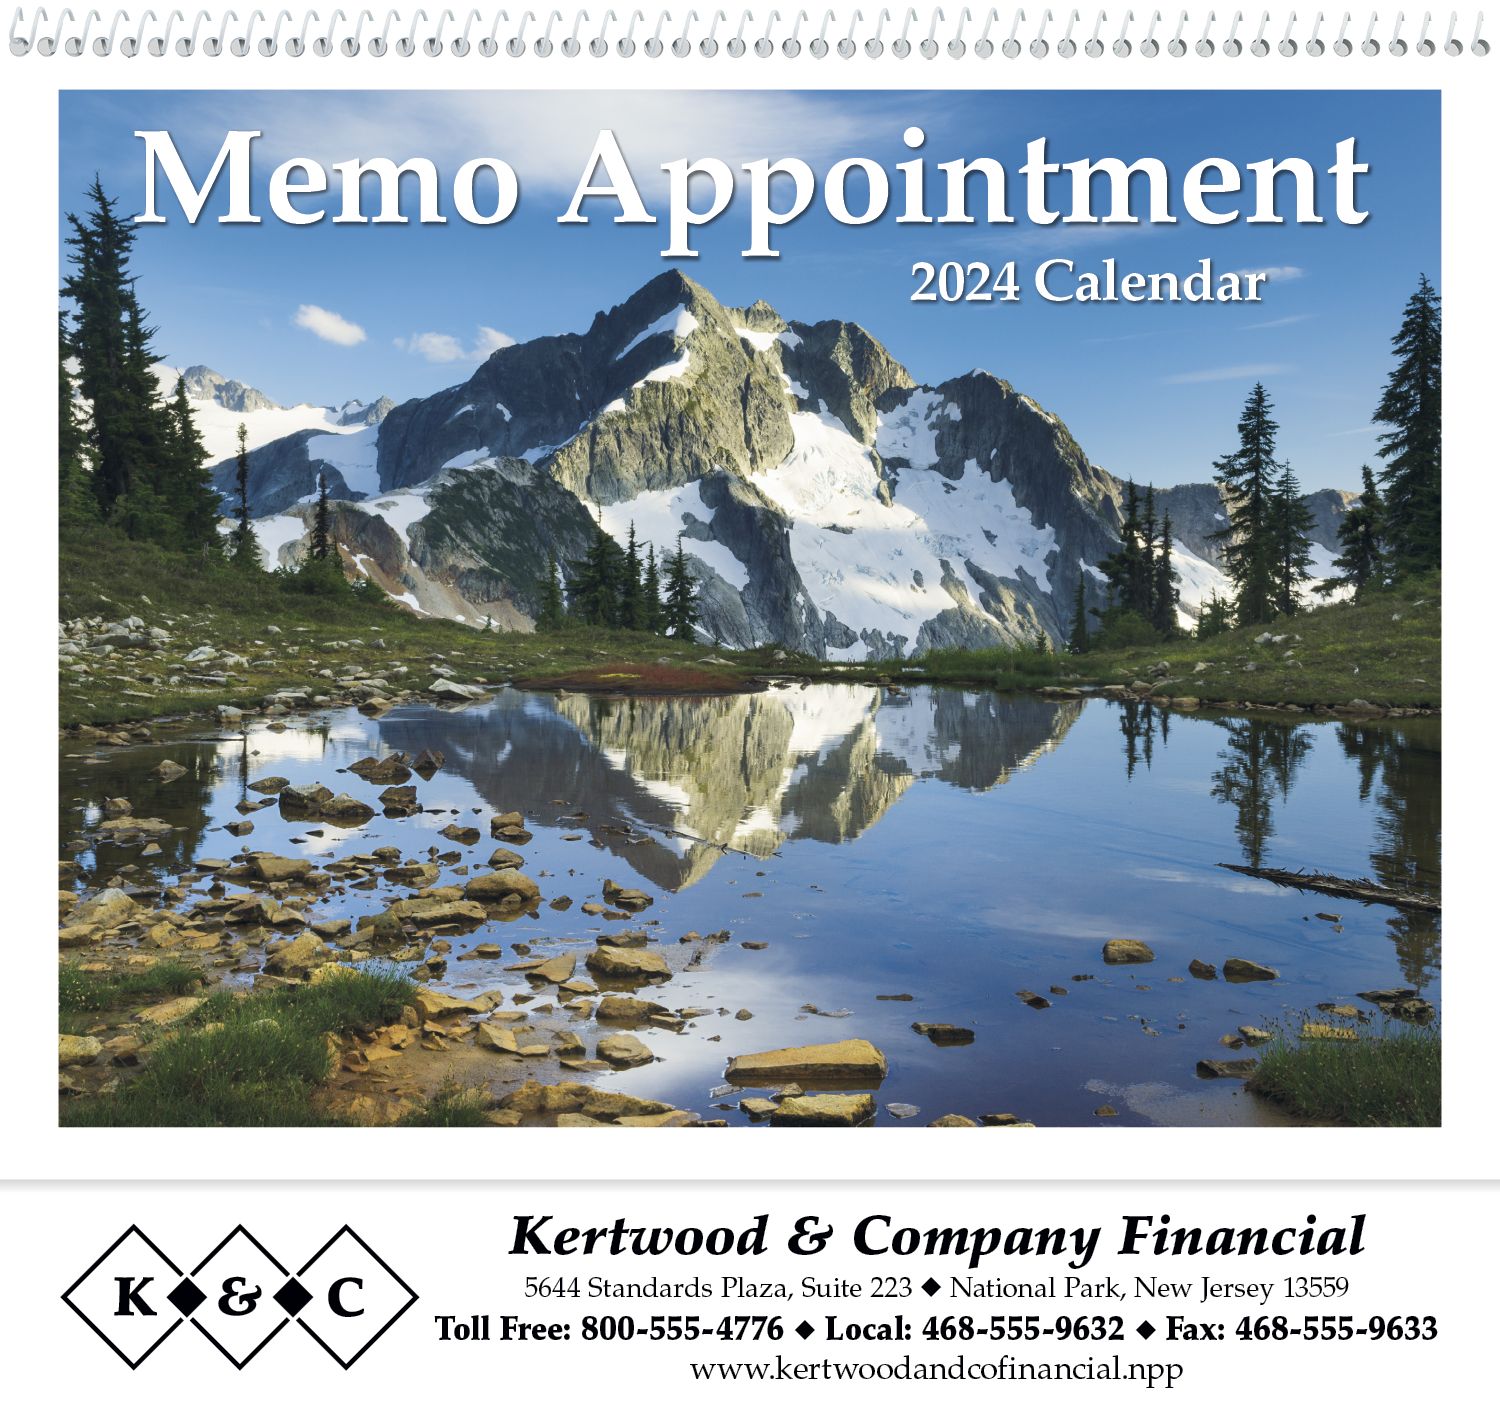 Memo Appointment with Tip-On Picture Promotional Calendar 